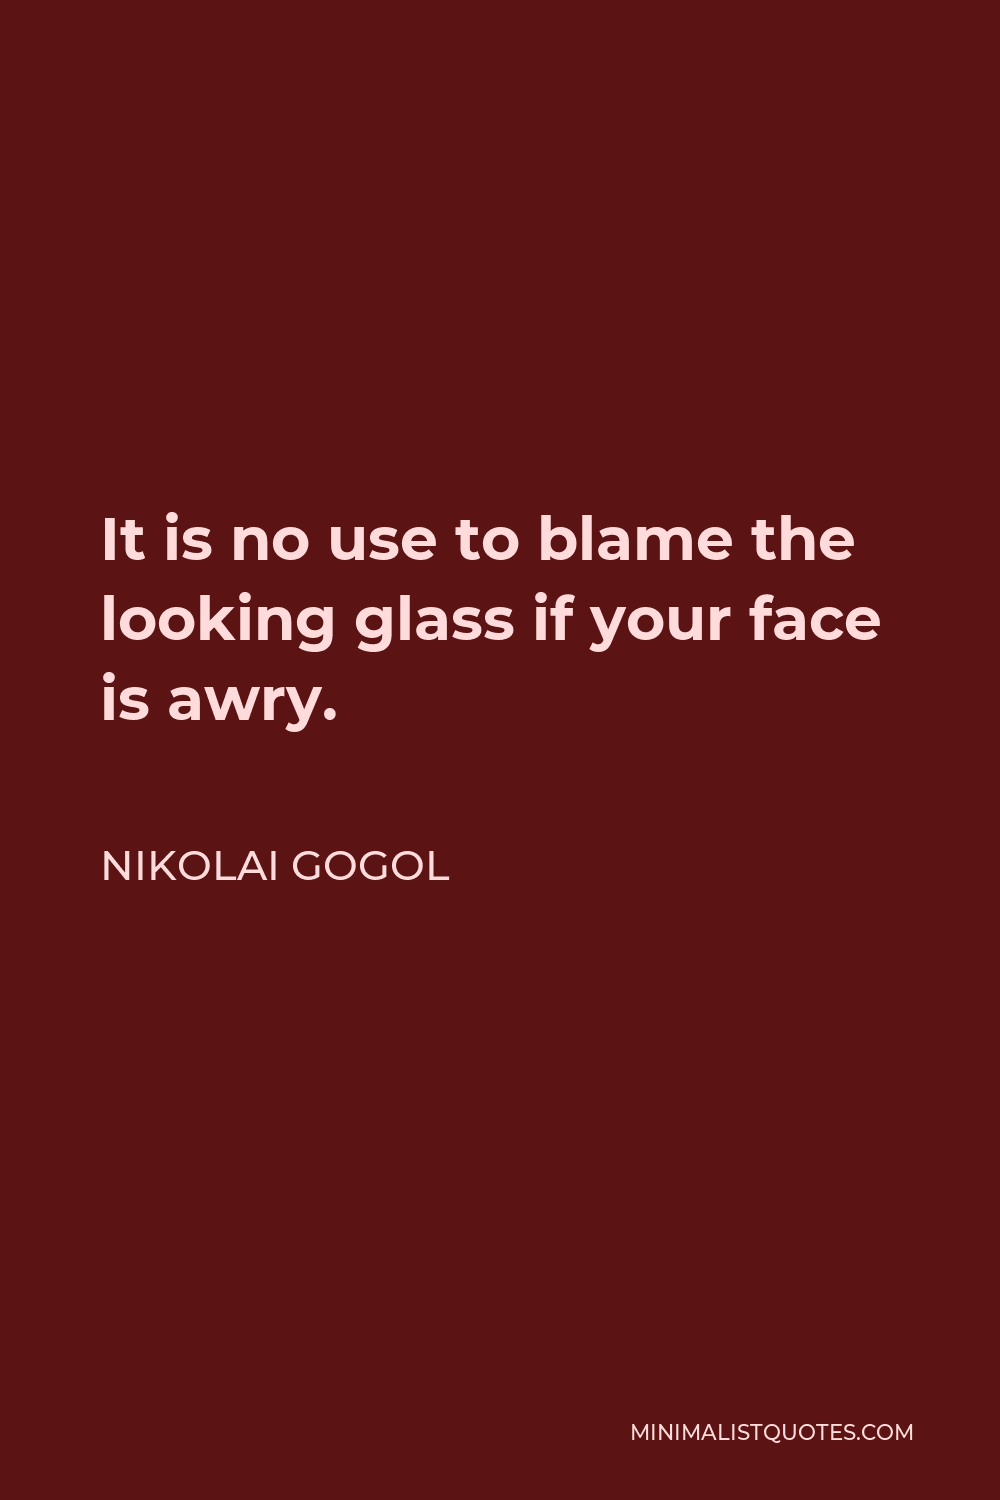 Nikolai Gogol Quote - It is no use to blame the looking glass if your face is awry.